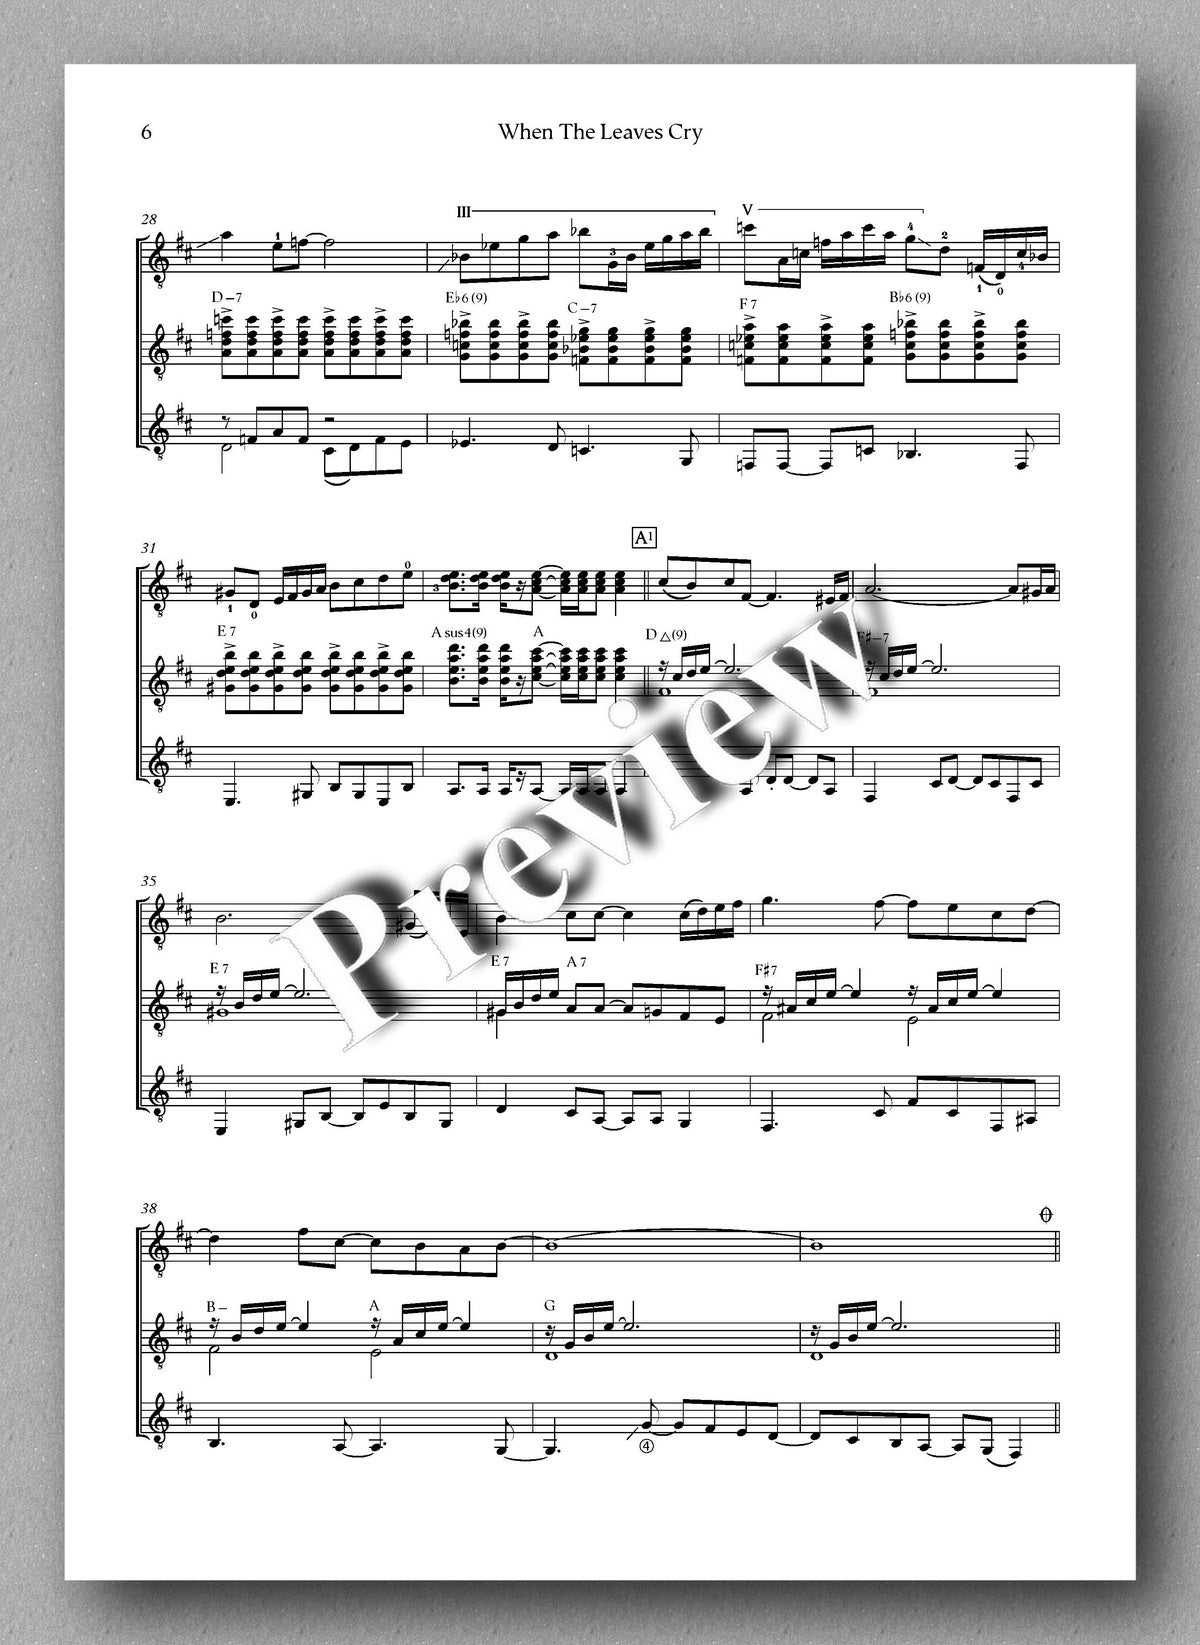 Plamen Petrov, When the Leaves Cry - preview of the music score 3